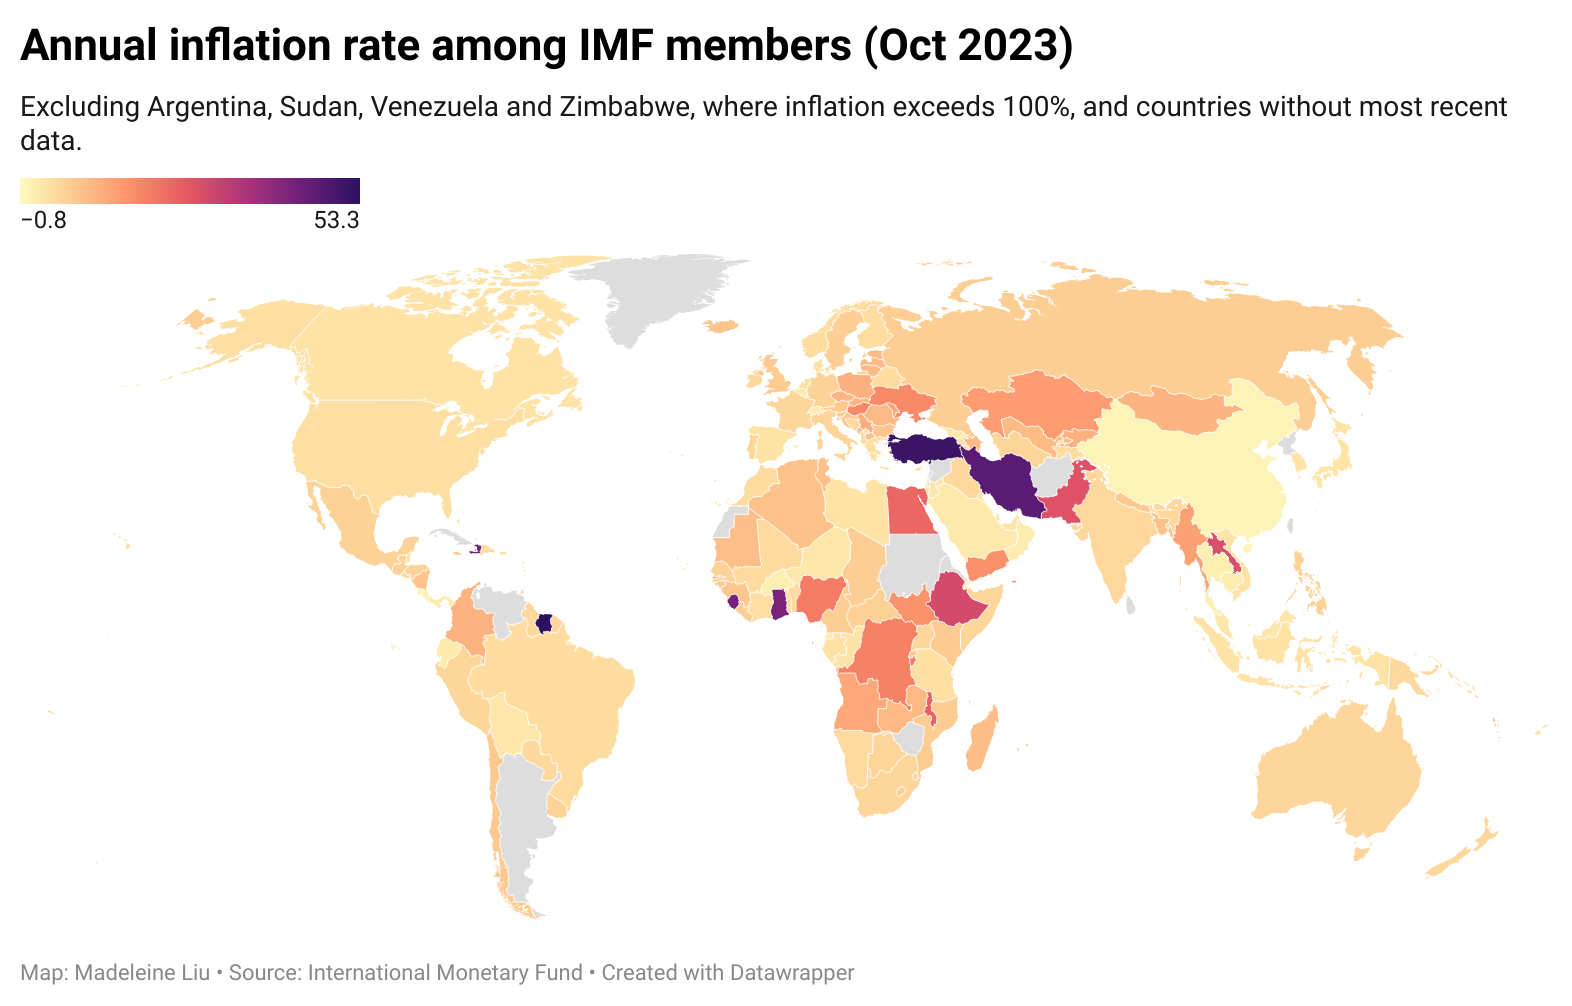 https://upload.wikimedia.org/wikipedia/commons/8/87/World_inflation_rate_October_2023.png